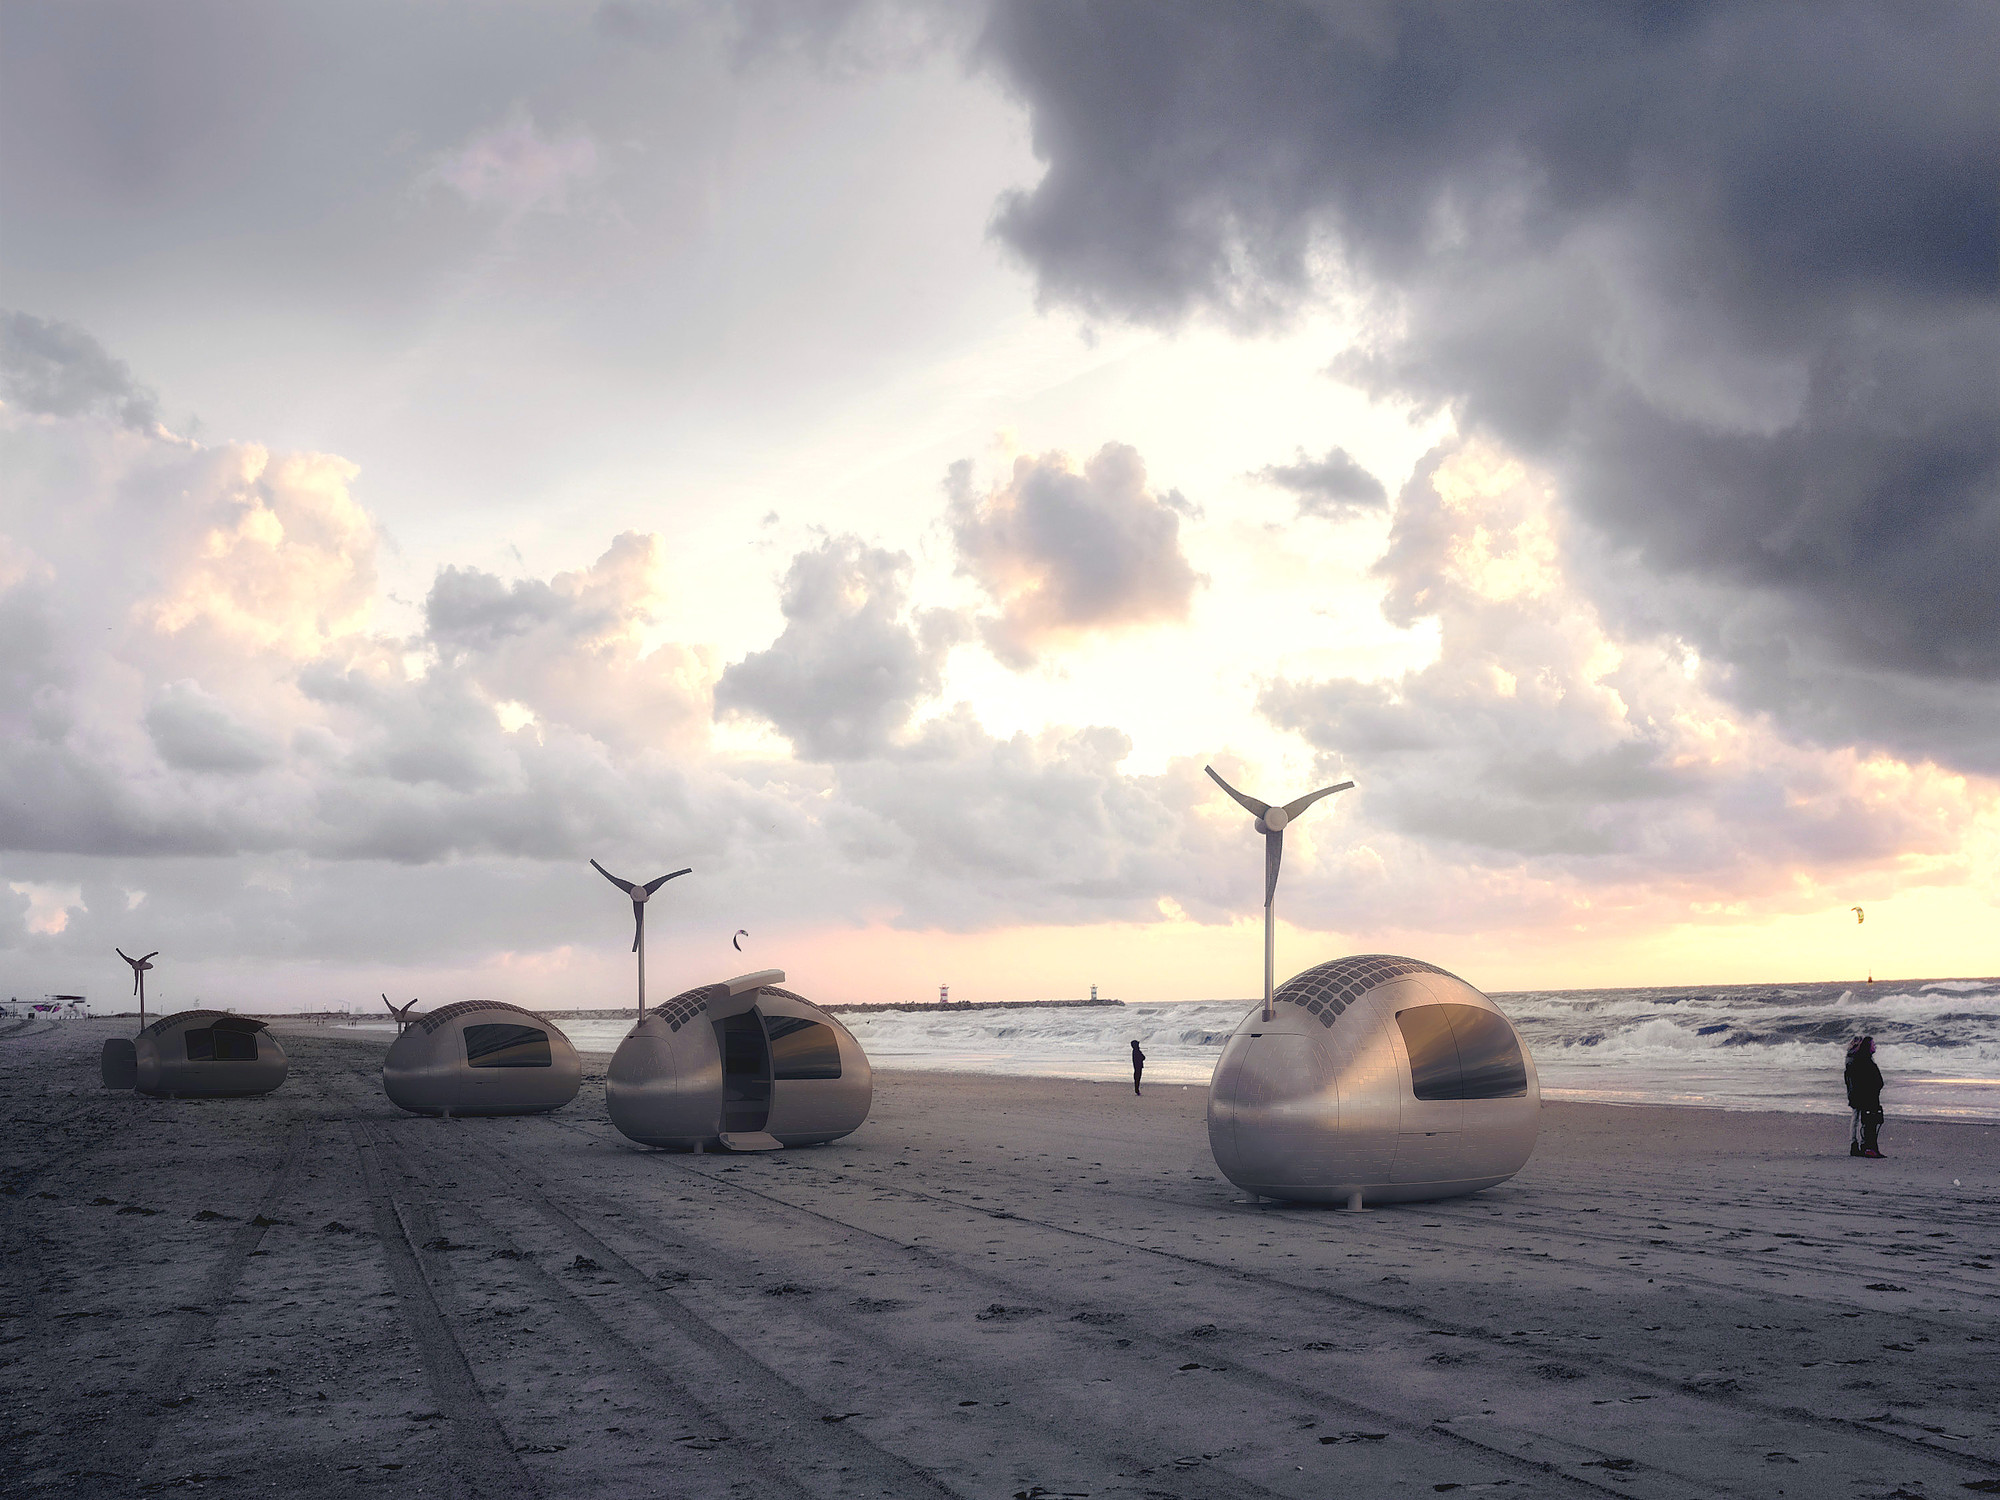 Arch2O-Ecocapsule Launches First Series of Self-Sustainable Micro Homes#0